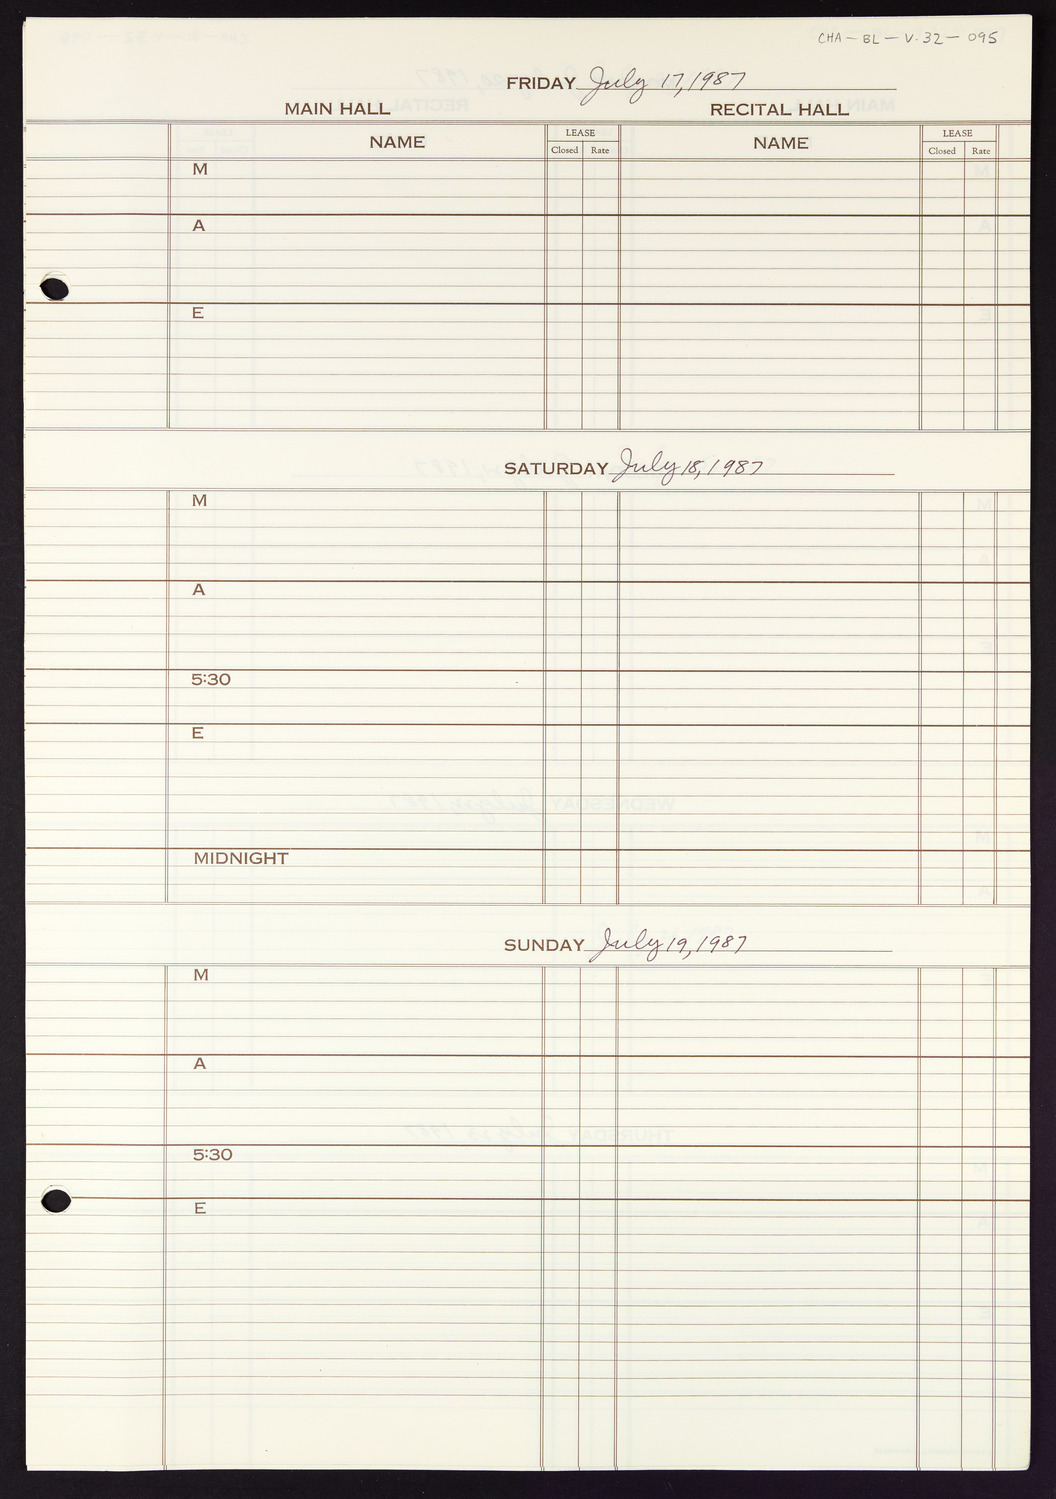 Carnegie Hall Booking Ledger, volume 32, page 95